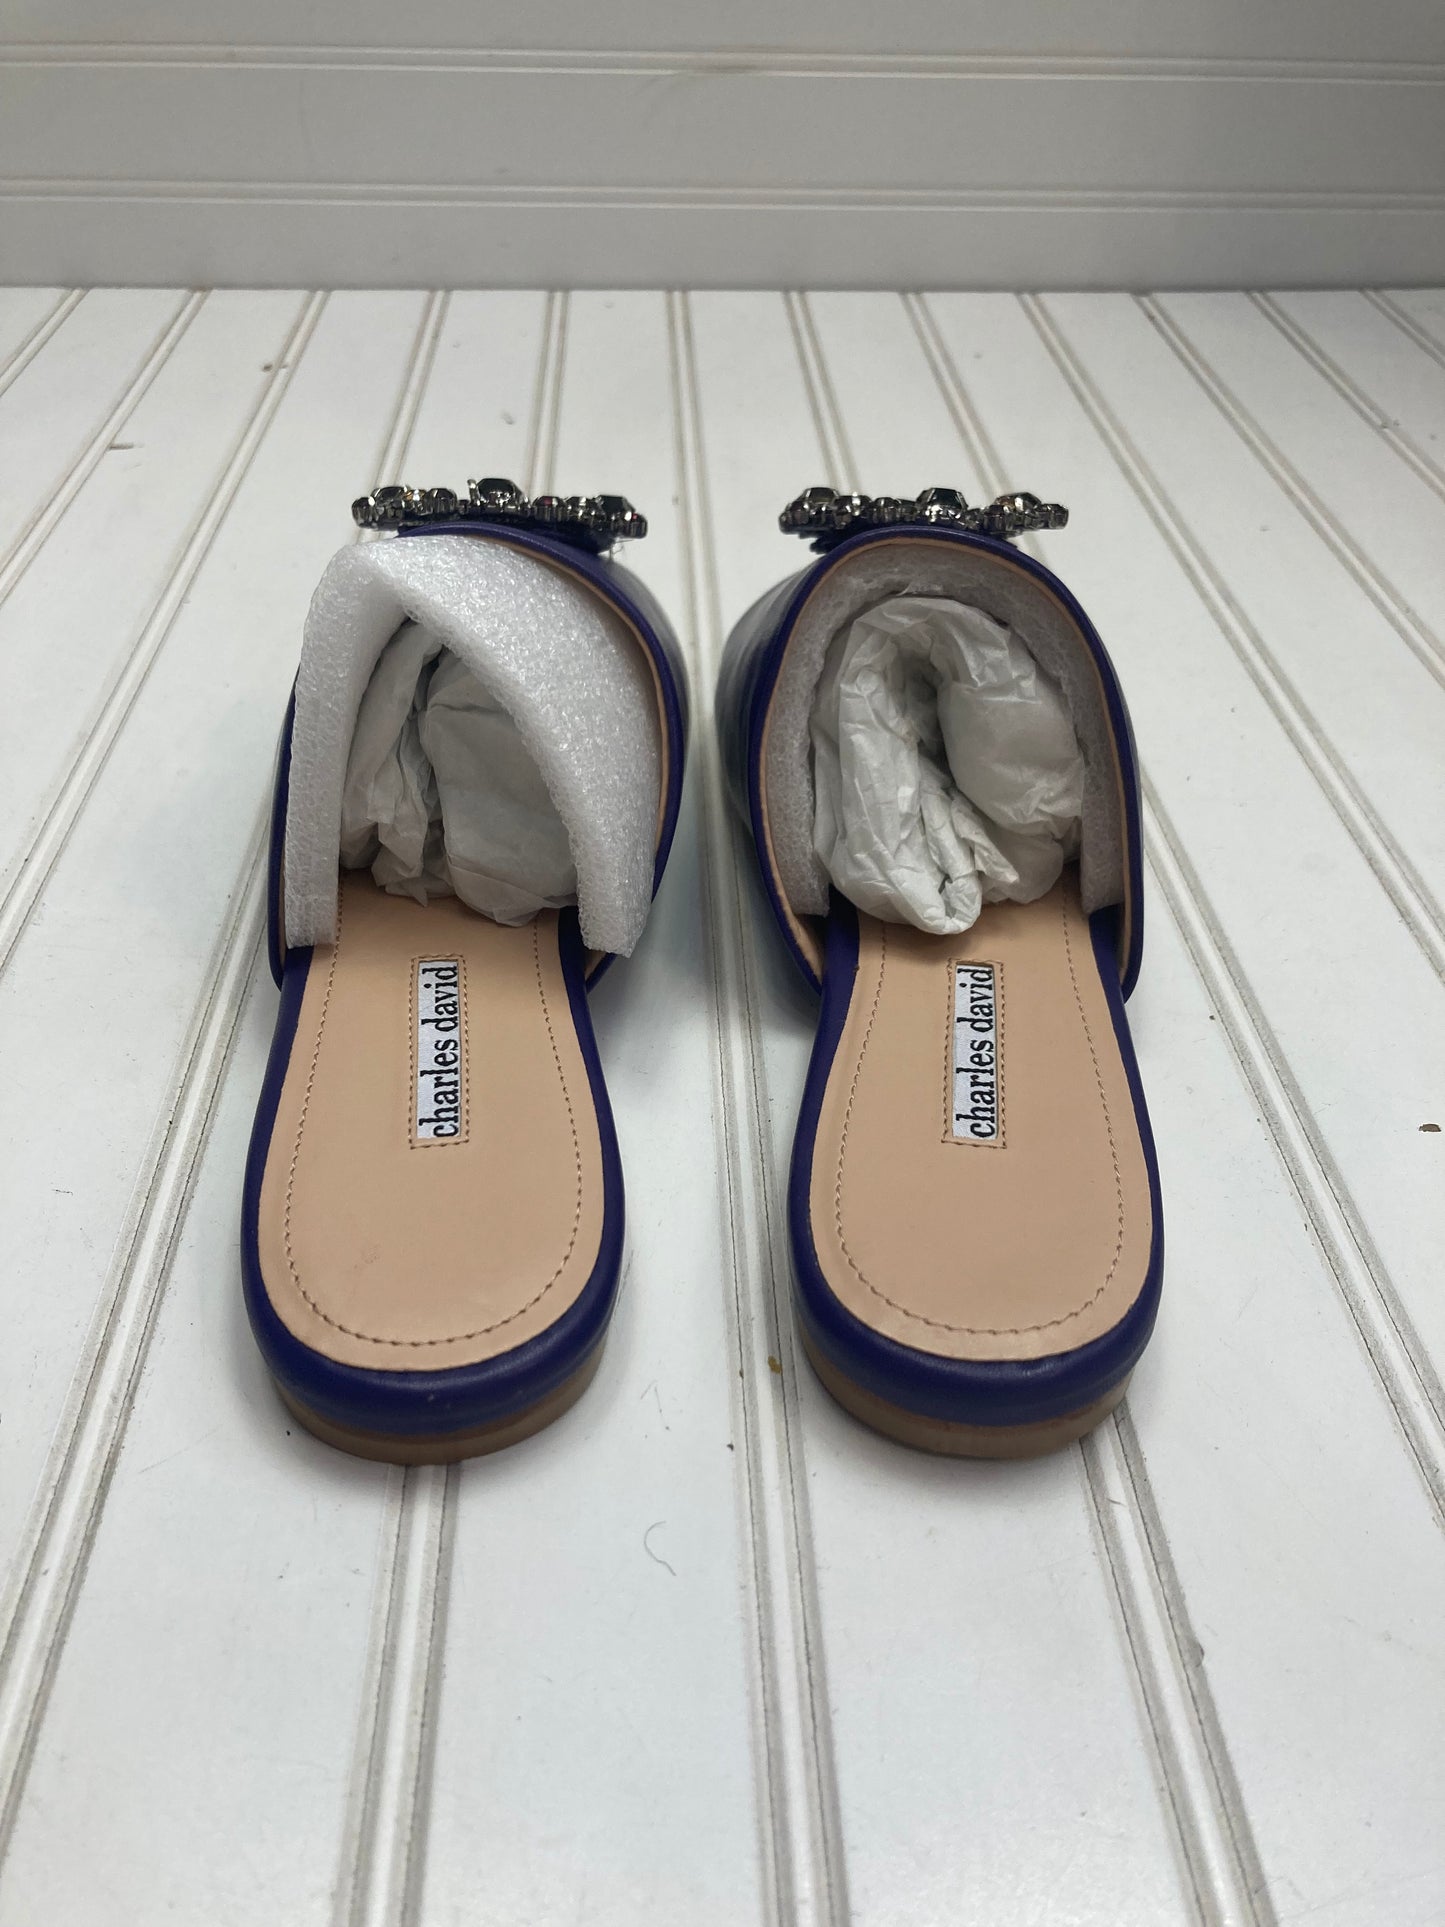 Sandals Flats By Charles David  Size: 9.5